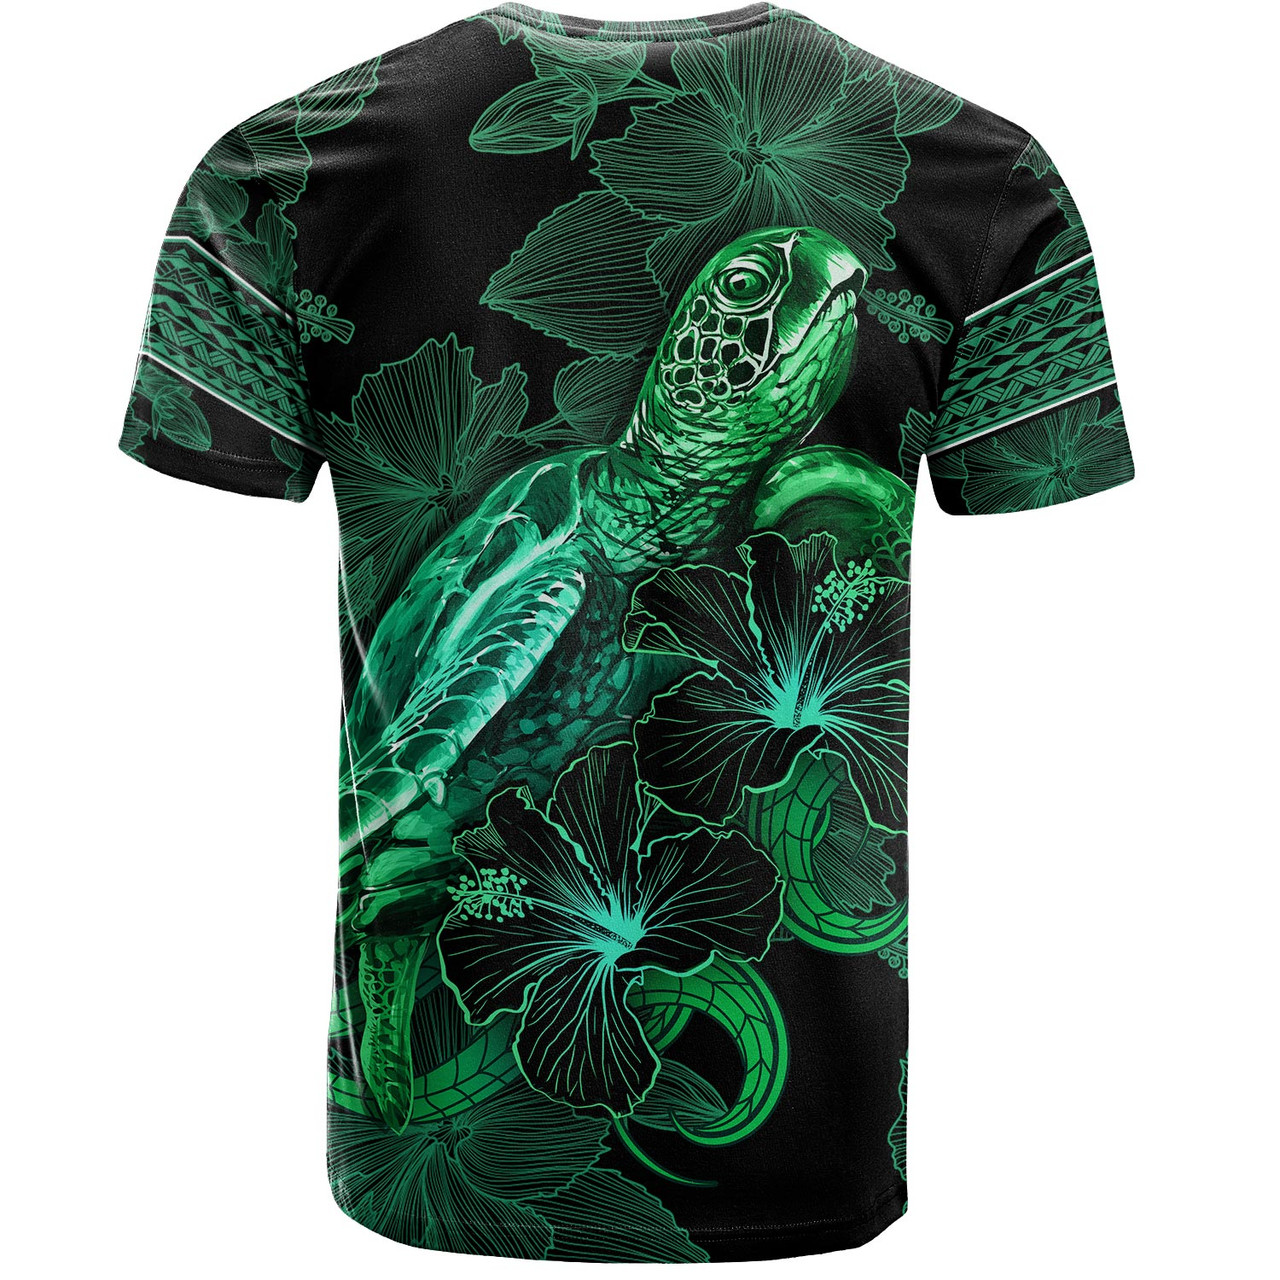 Kosrae T-Shirt  Sea Turtle With Blooming Hibiscus Flowers Tribal Green